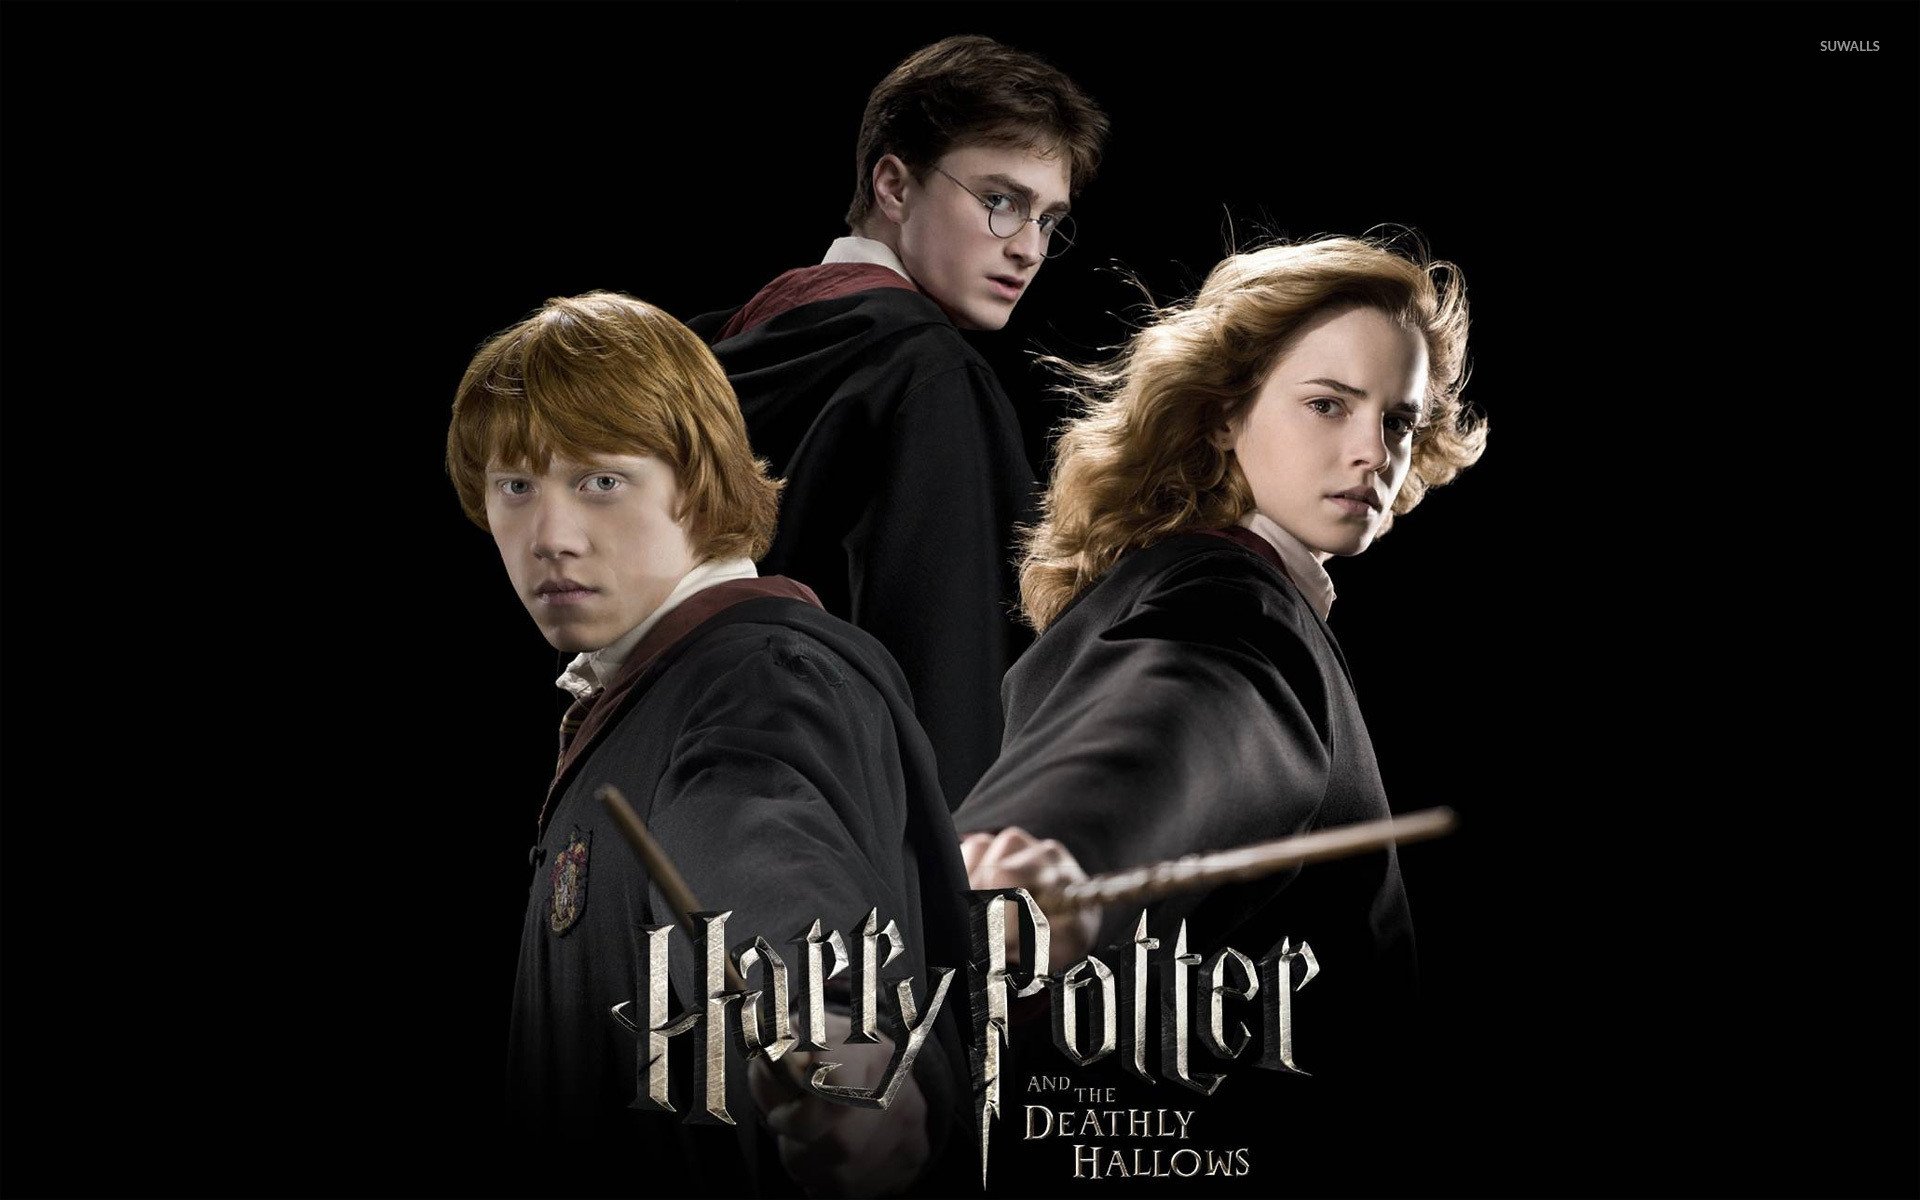 1920x1200 Harry Potter and the Deathly Hallows wallpaper